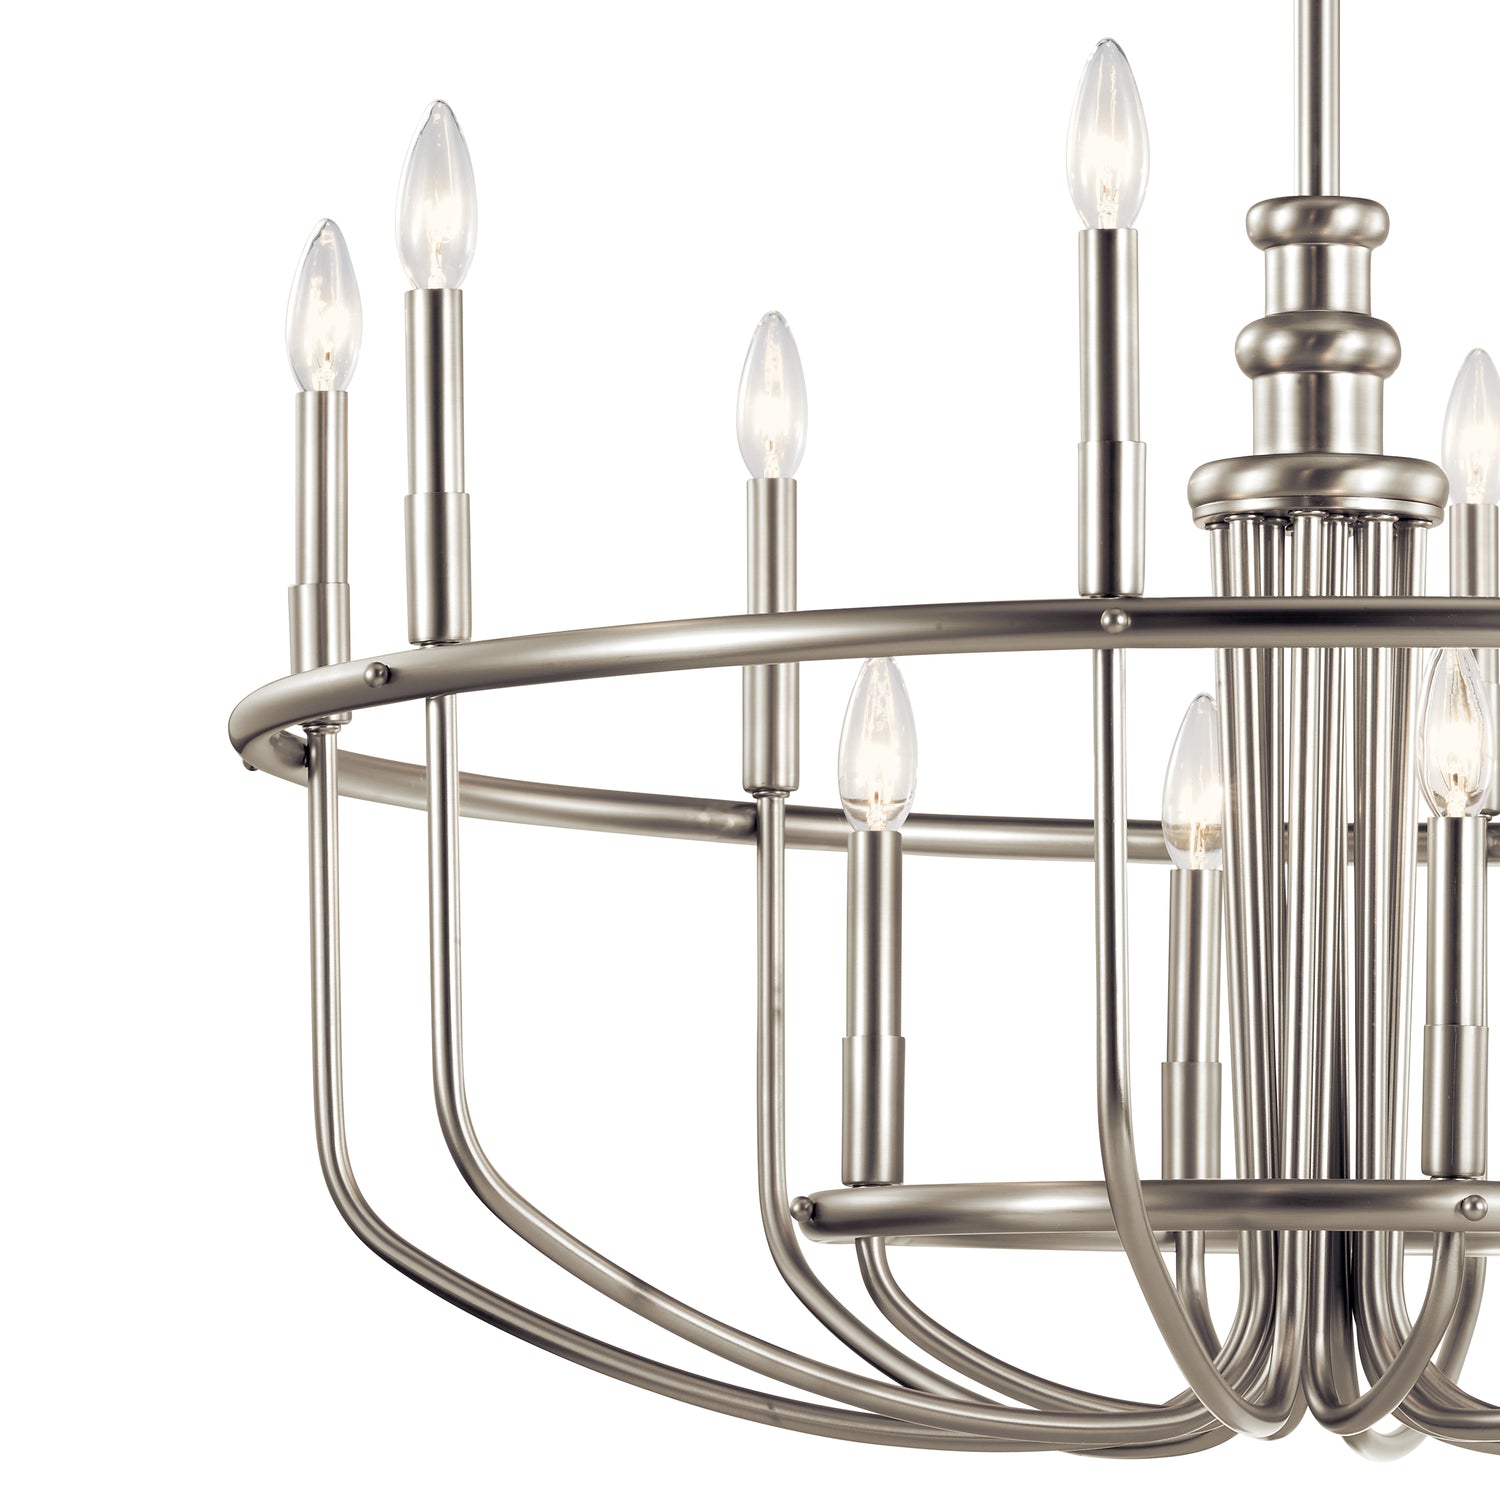 Capitol Hill Chandelier Brushed Nickel